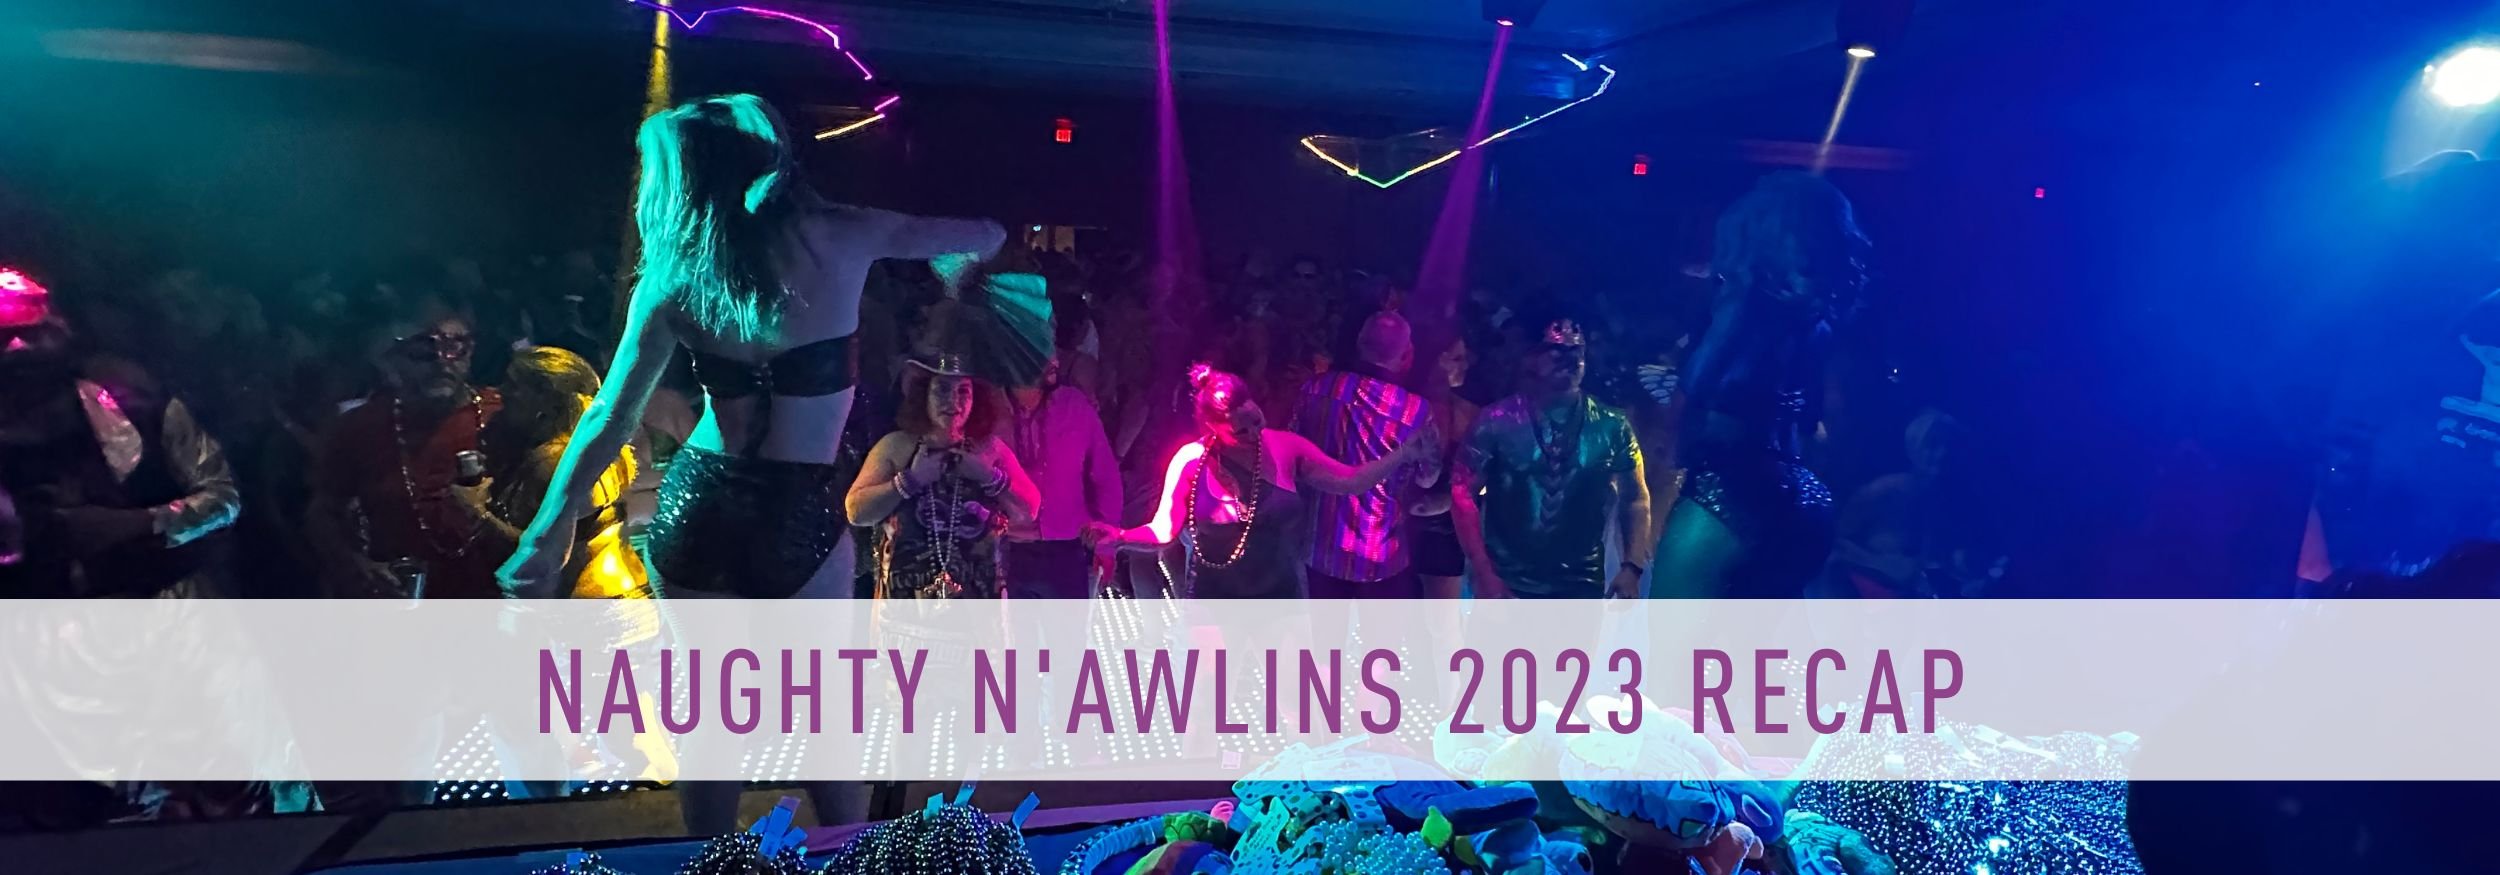 Inside Naughty Nawlins 2023 25th Anniversary — NAUGHTY EVENTS